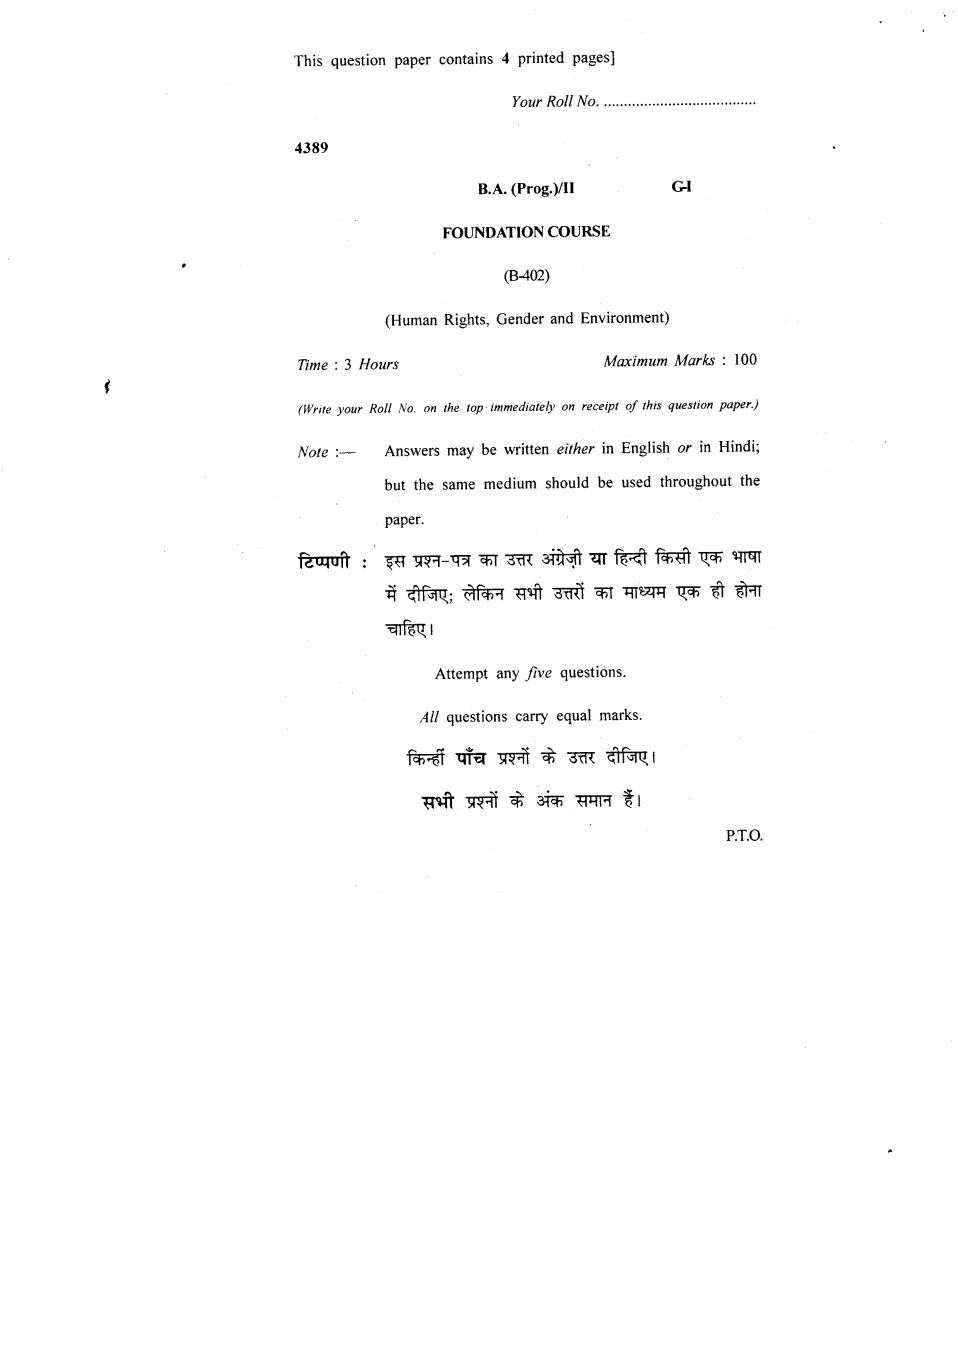 DU SOL Question Paper 2018 BA Human Rights, Gender and Environment - Page 1